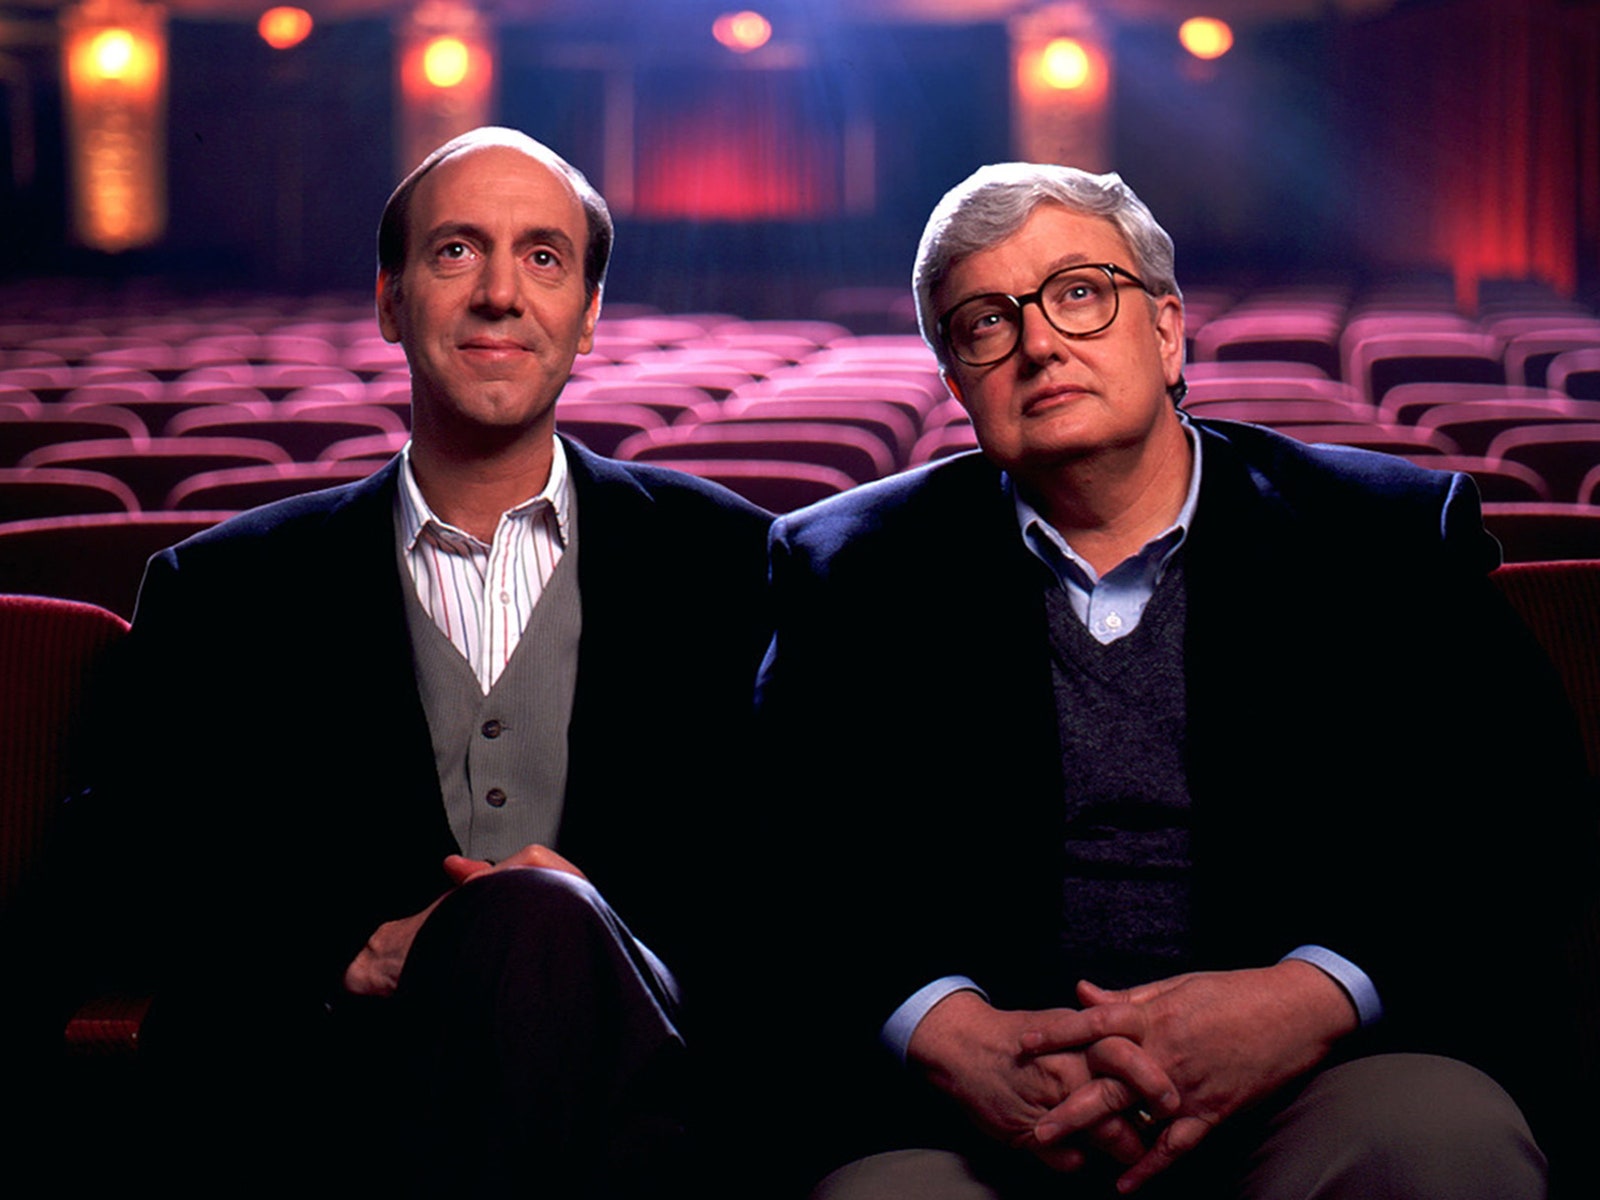 A photo of Gene Siskel and Roger Ebert sitting together in a movie theatre.